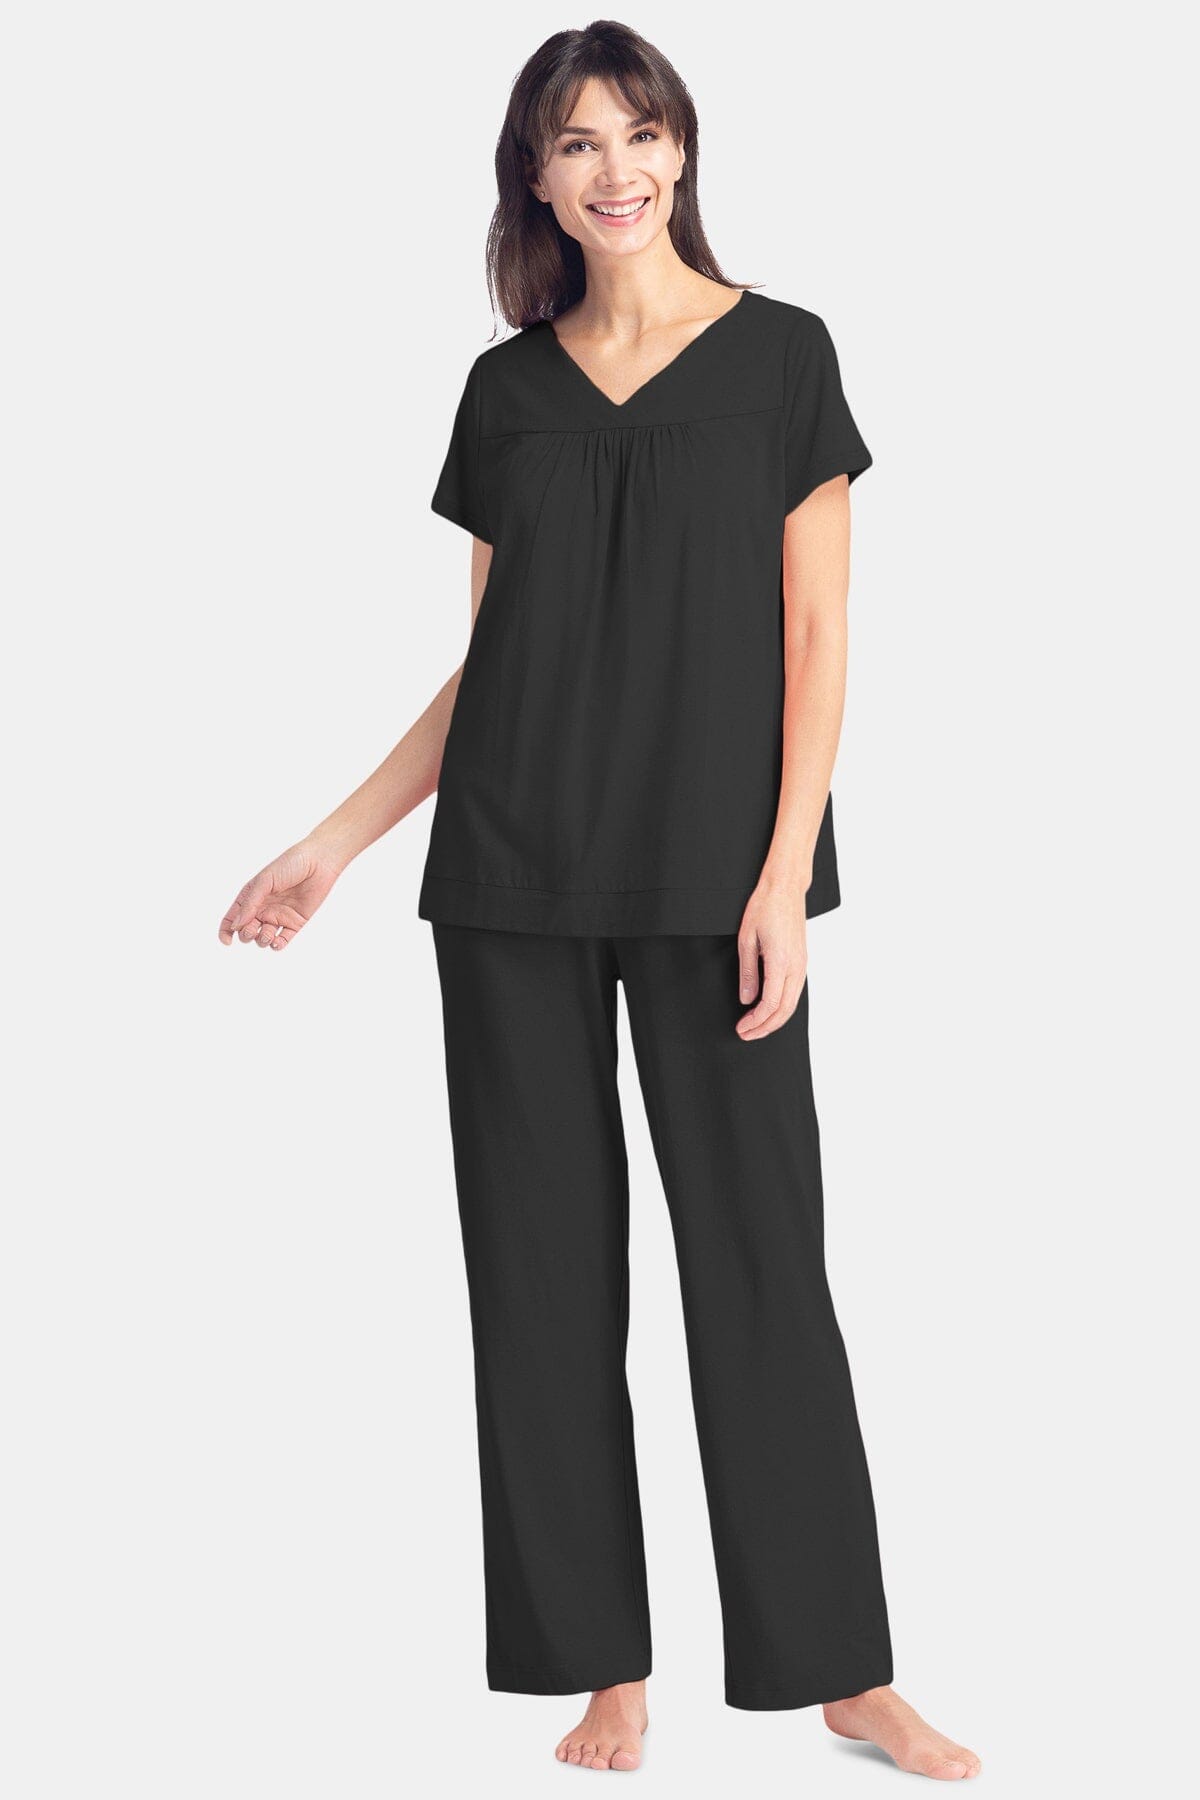 Women's Jersey Pajama Set with Gift Box- Short Sleeve Top and Full Length Pant Womens>Sleep and Lounge>Pajamas Fishers Finery Black XS 